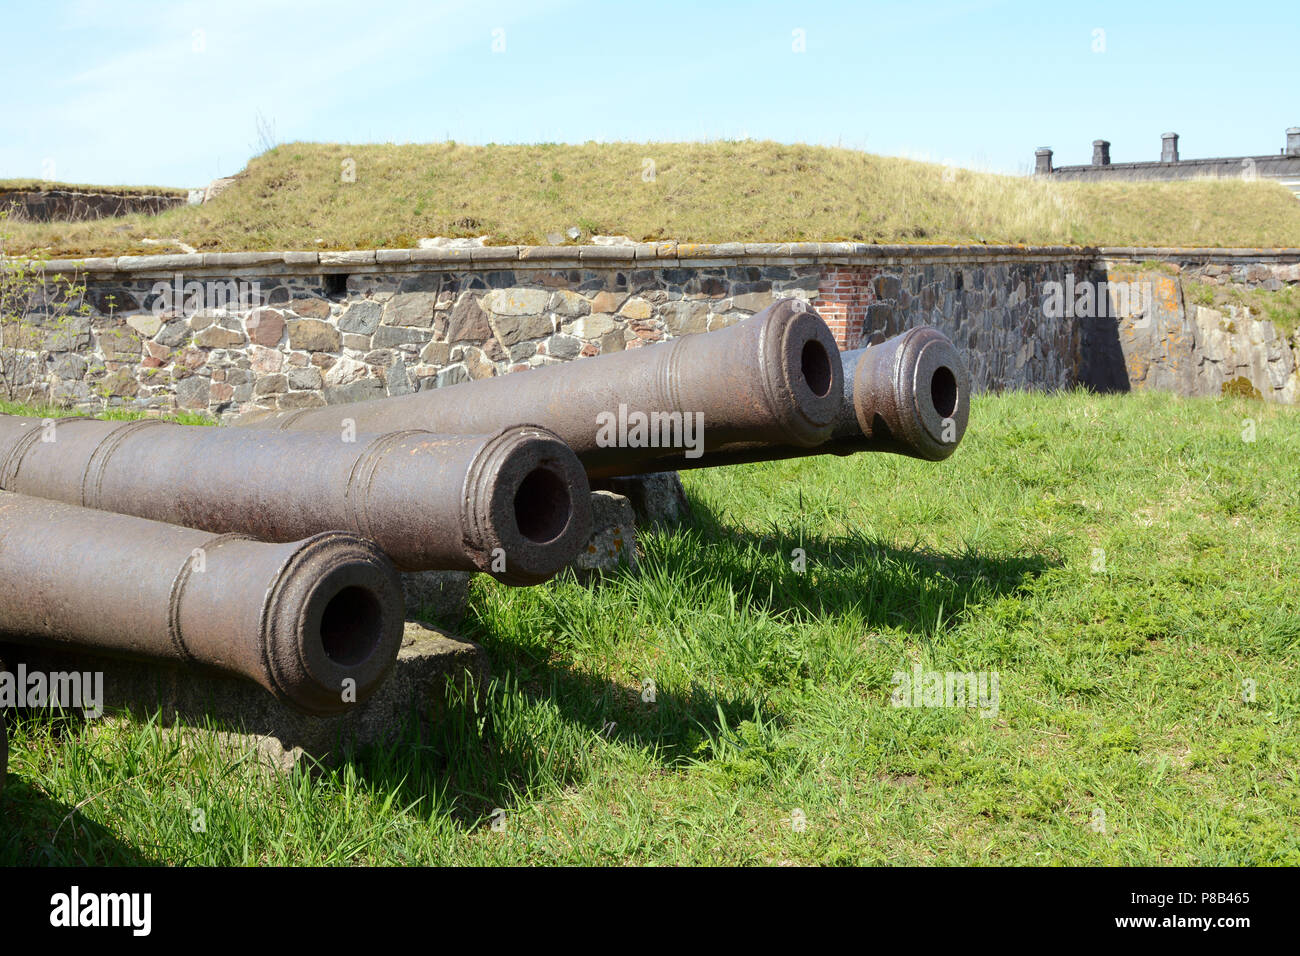 Four old abandoned military cannons on grass in a Suomenlinna bastion Stock Photo